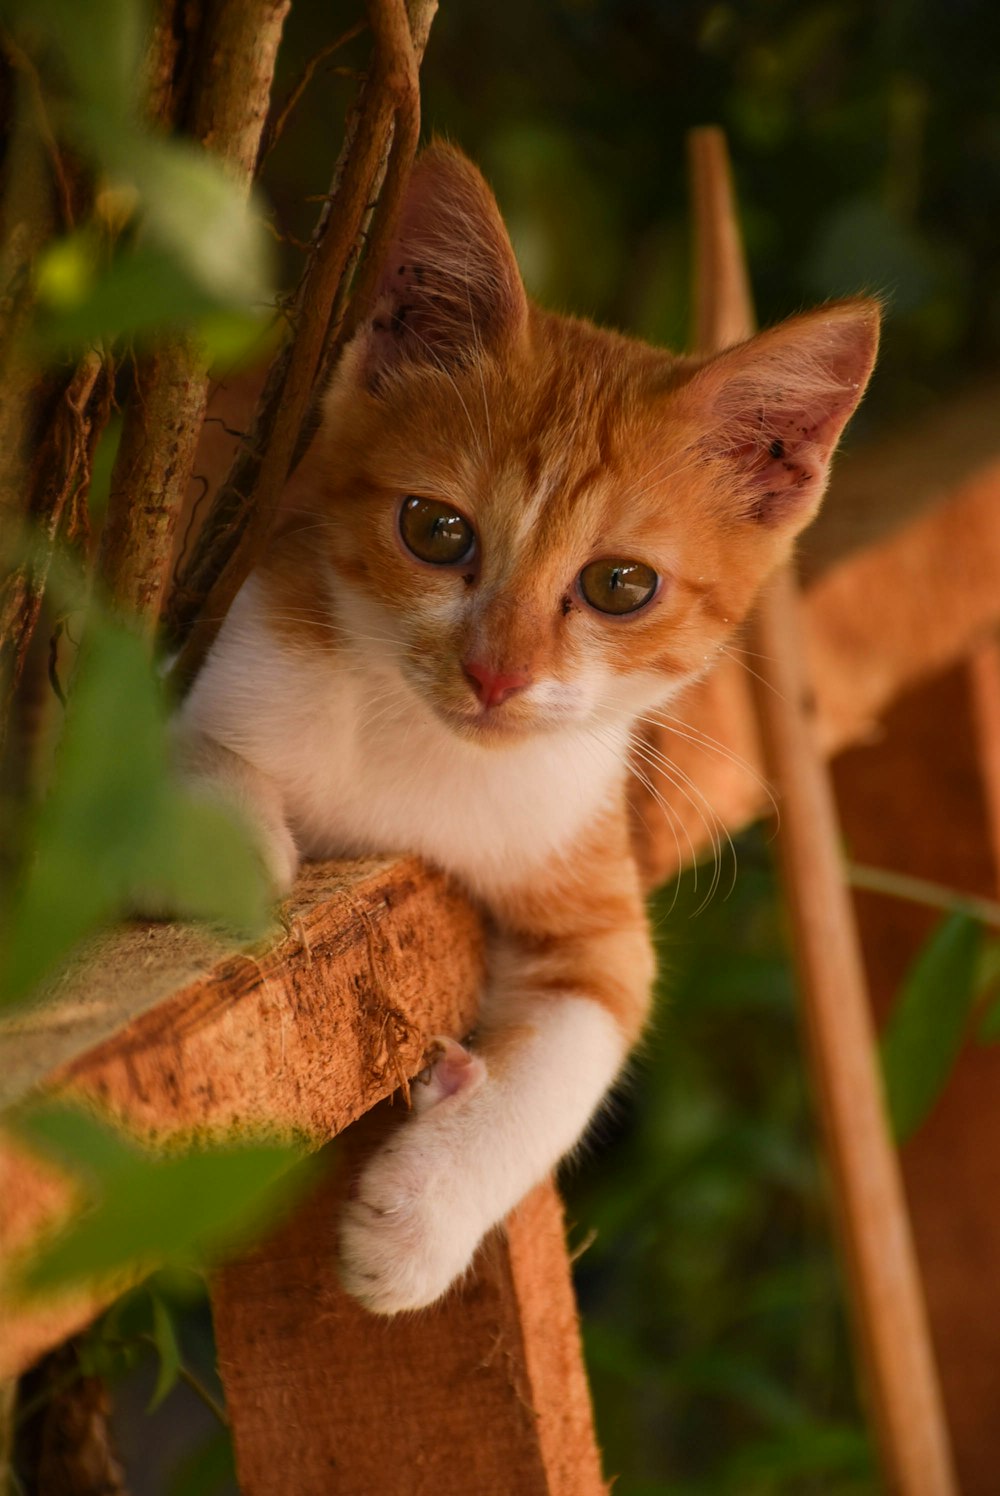 a small orange and white kitten sitting on top of a wooden fence